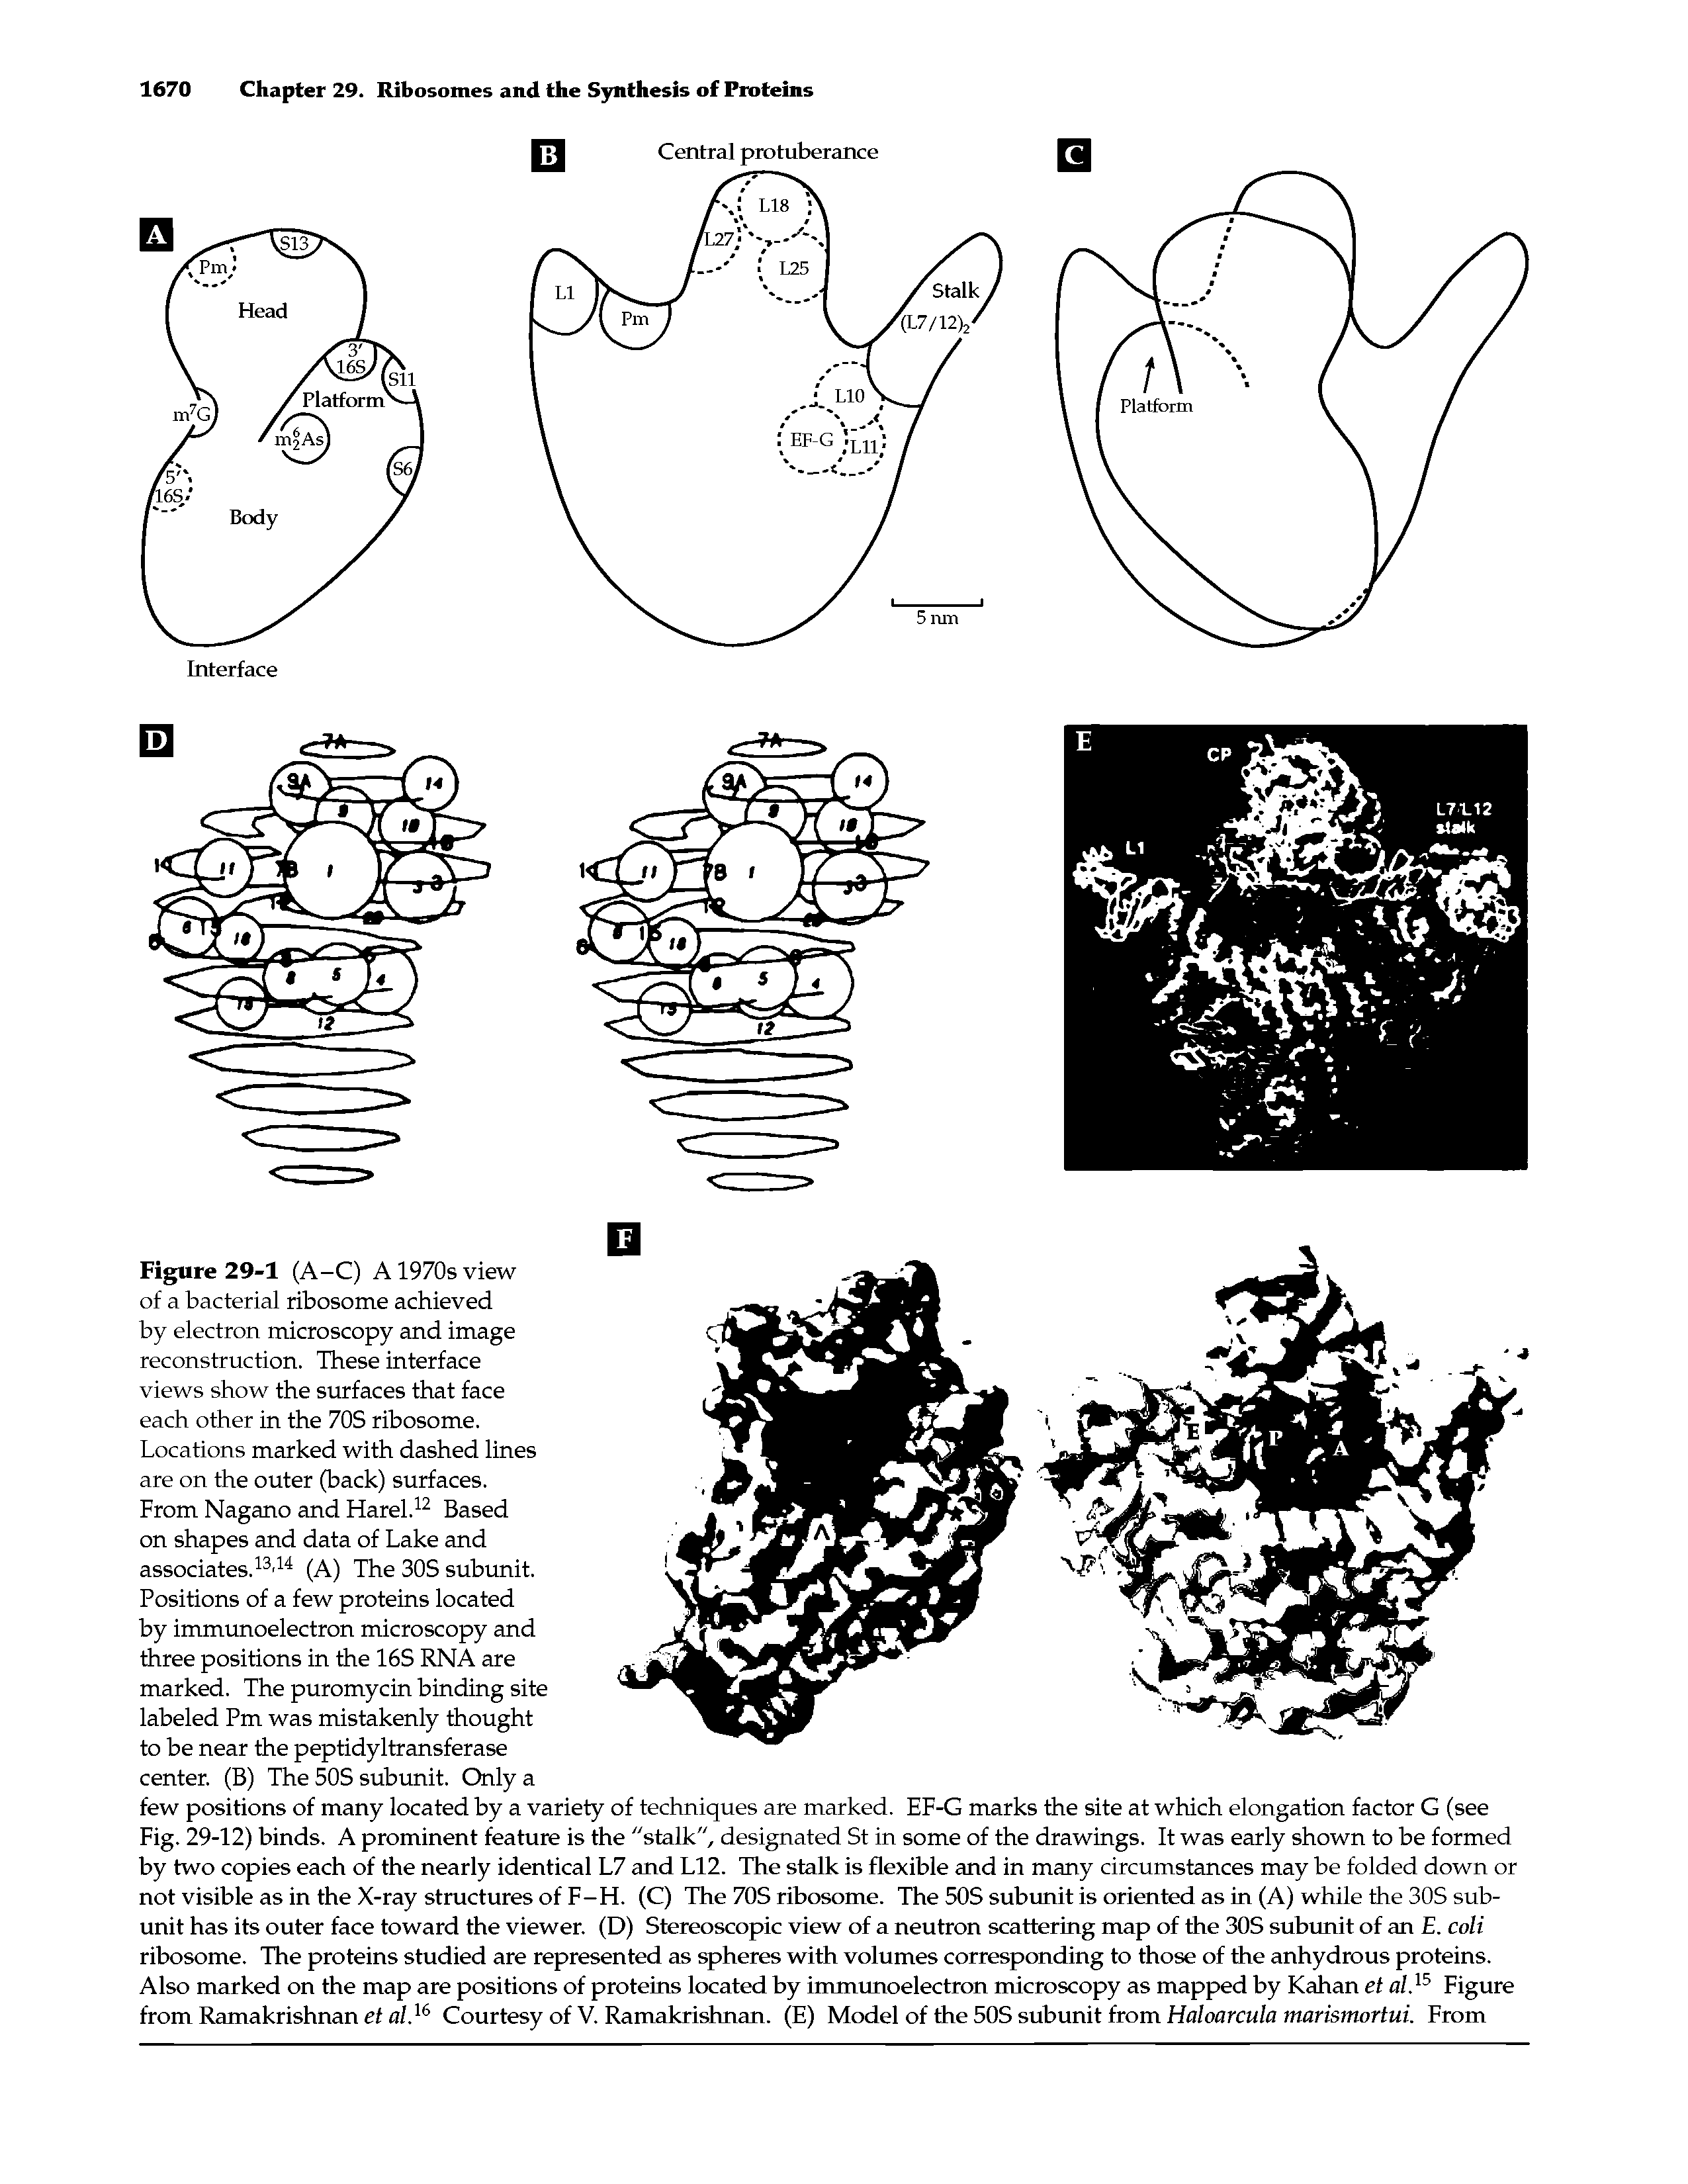 Figure 29-1 (A-C) A 1970s view of a bacterial ribosome achieved by electron microscopy and image reconstruction. These interface views show the surfaces that face each other in the 70S ribosome.